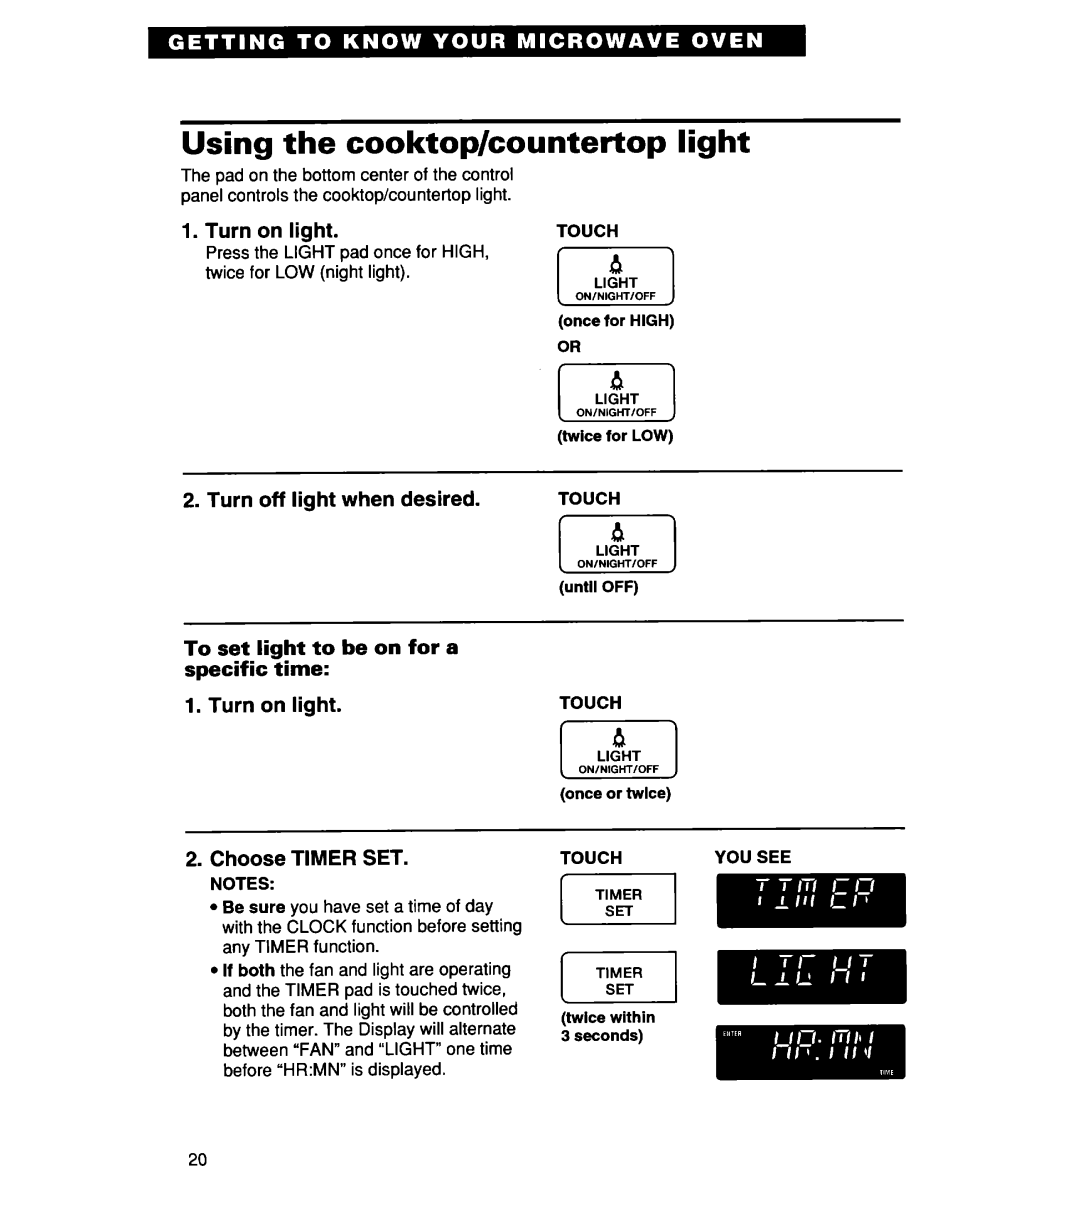 Whirlpool MH7135XE Using the cooktop/countertop light, Turn on light, Turn off light when desired, Choose TIMER SET 